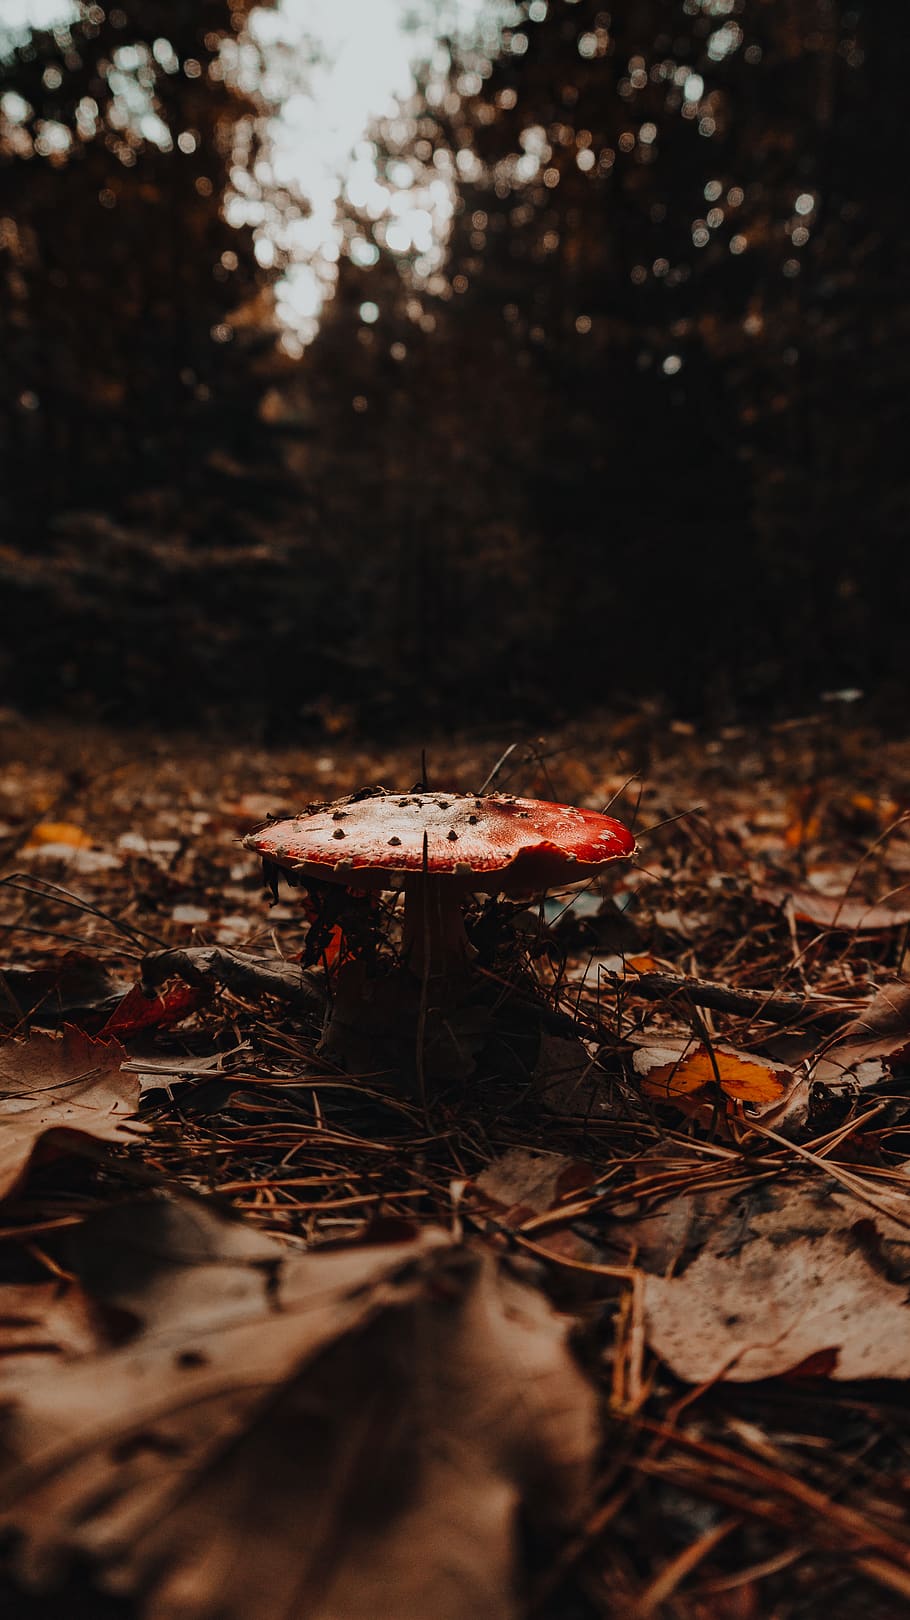 A mushroom sits on the forest floor surrounded by fallen leaves. - Light brown